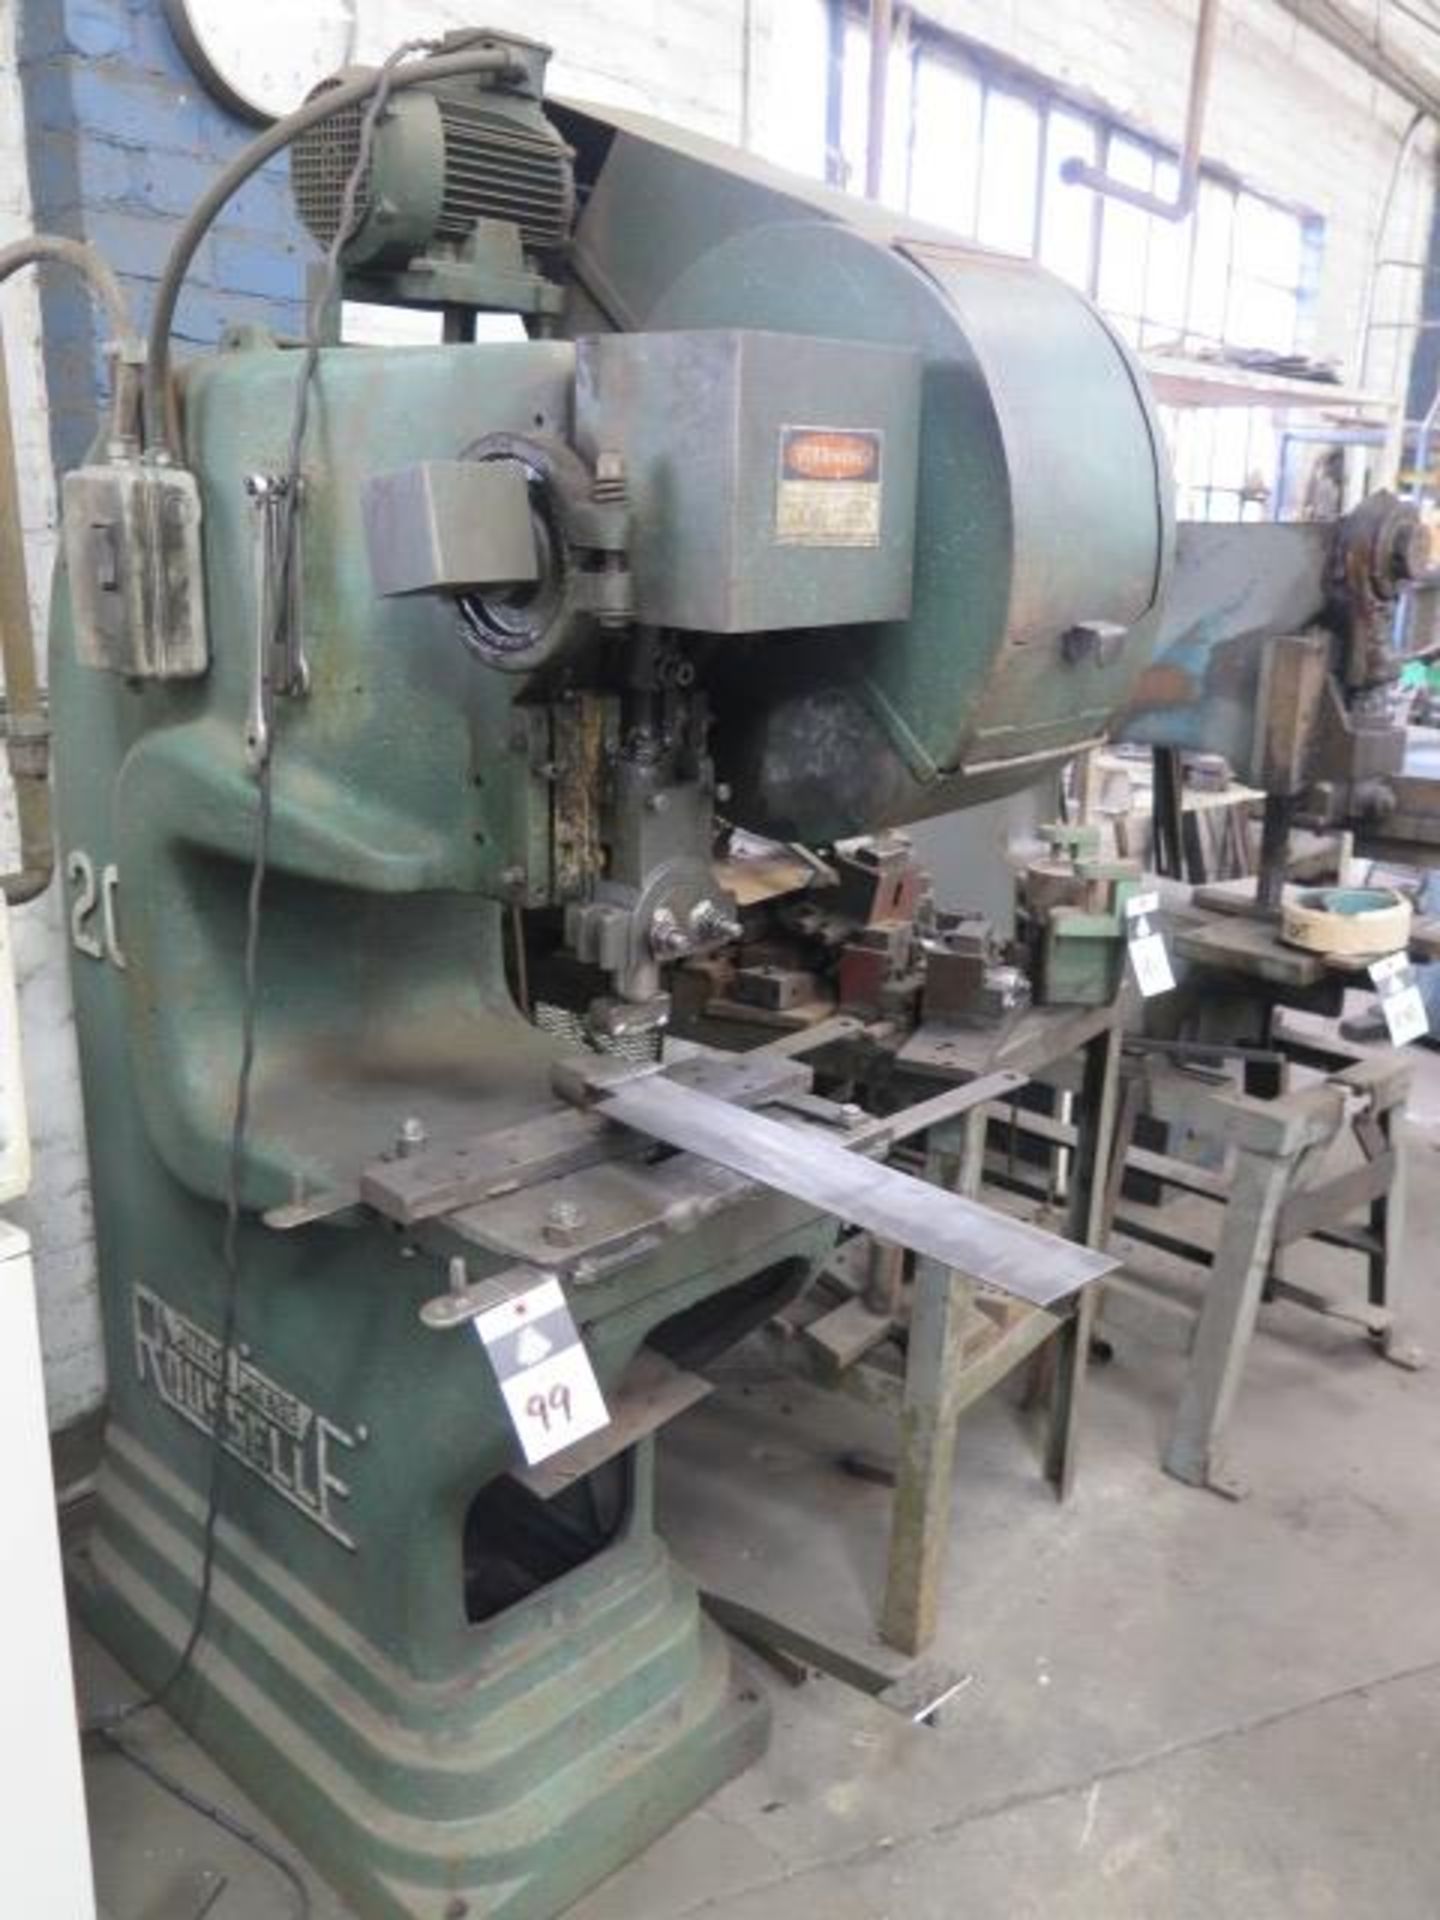 Rousselle 2G 15 Ton Straight Side Press s/n 20560 w/ 170 Strokes/Min, SOLD AS IS AND PARTS ONLY - Image 3 of 8